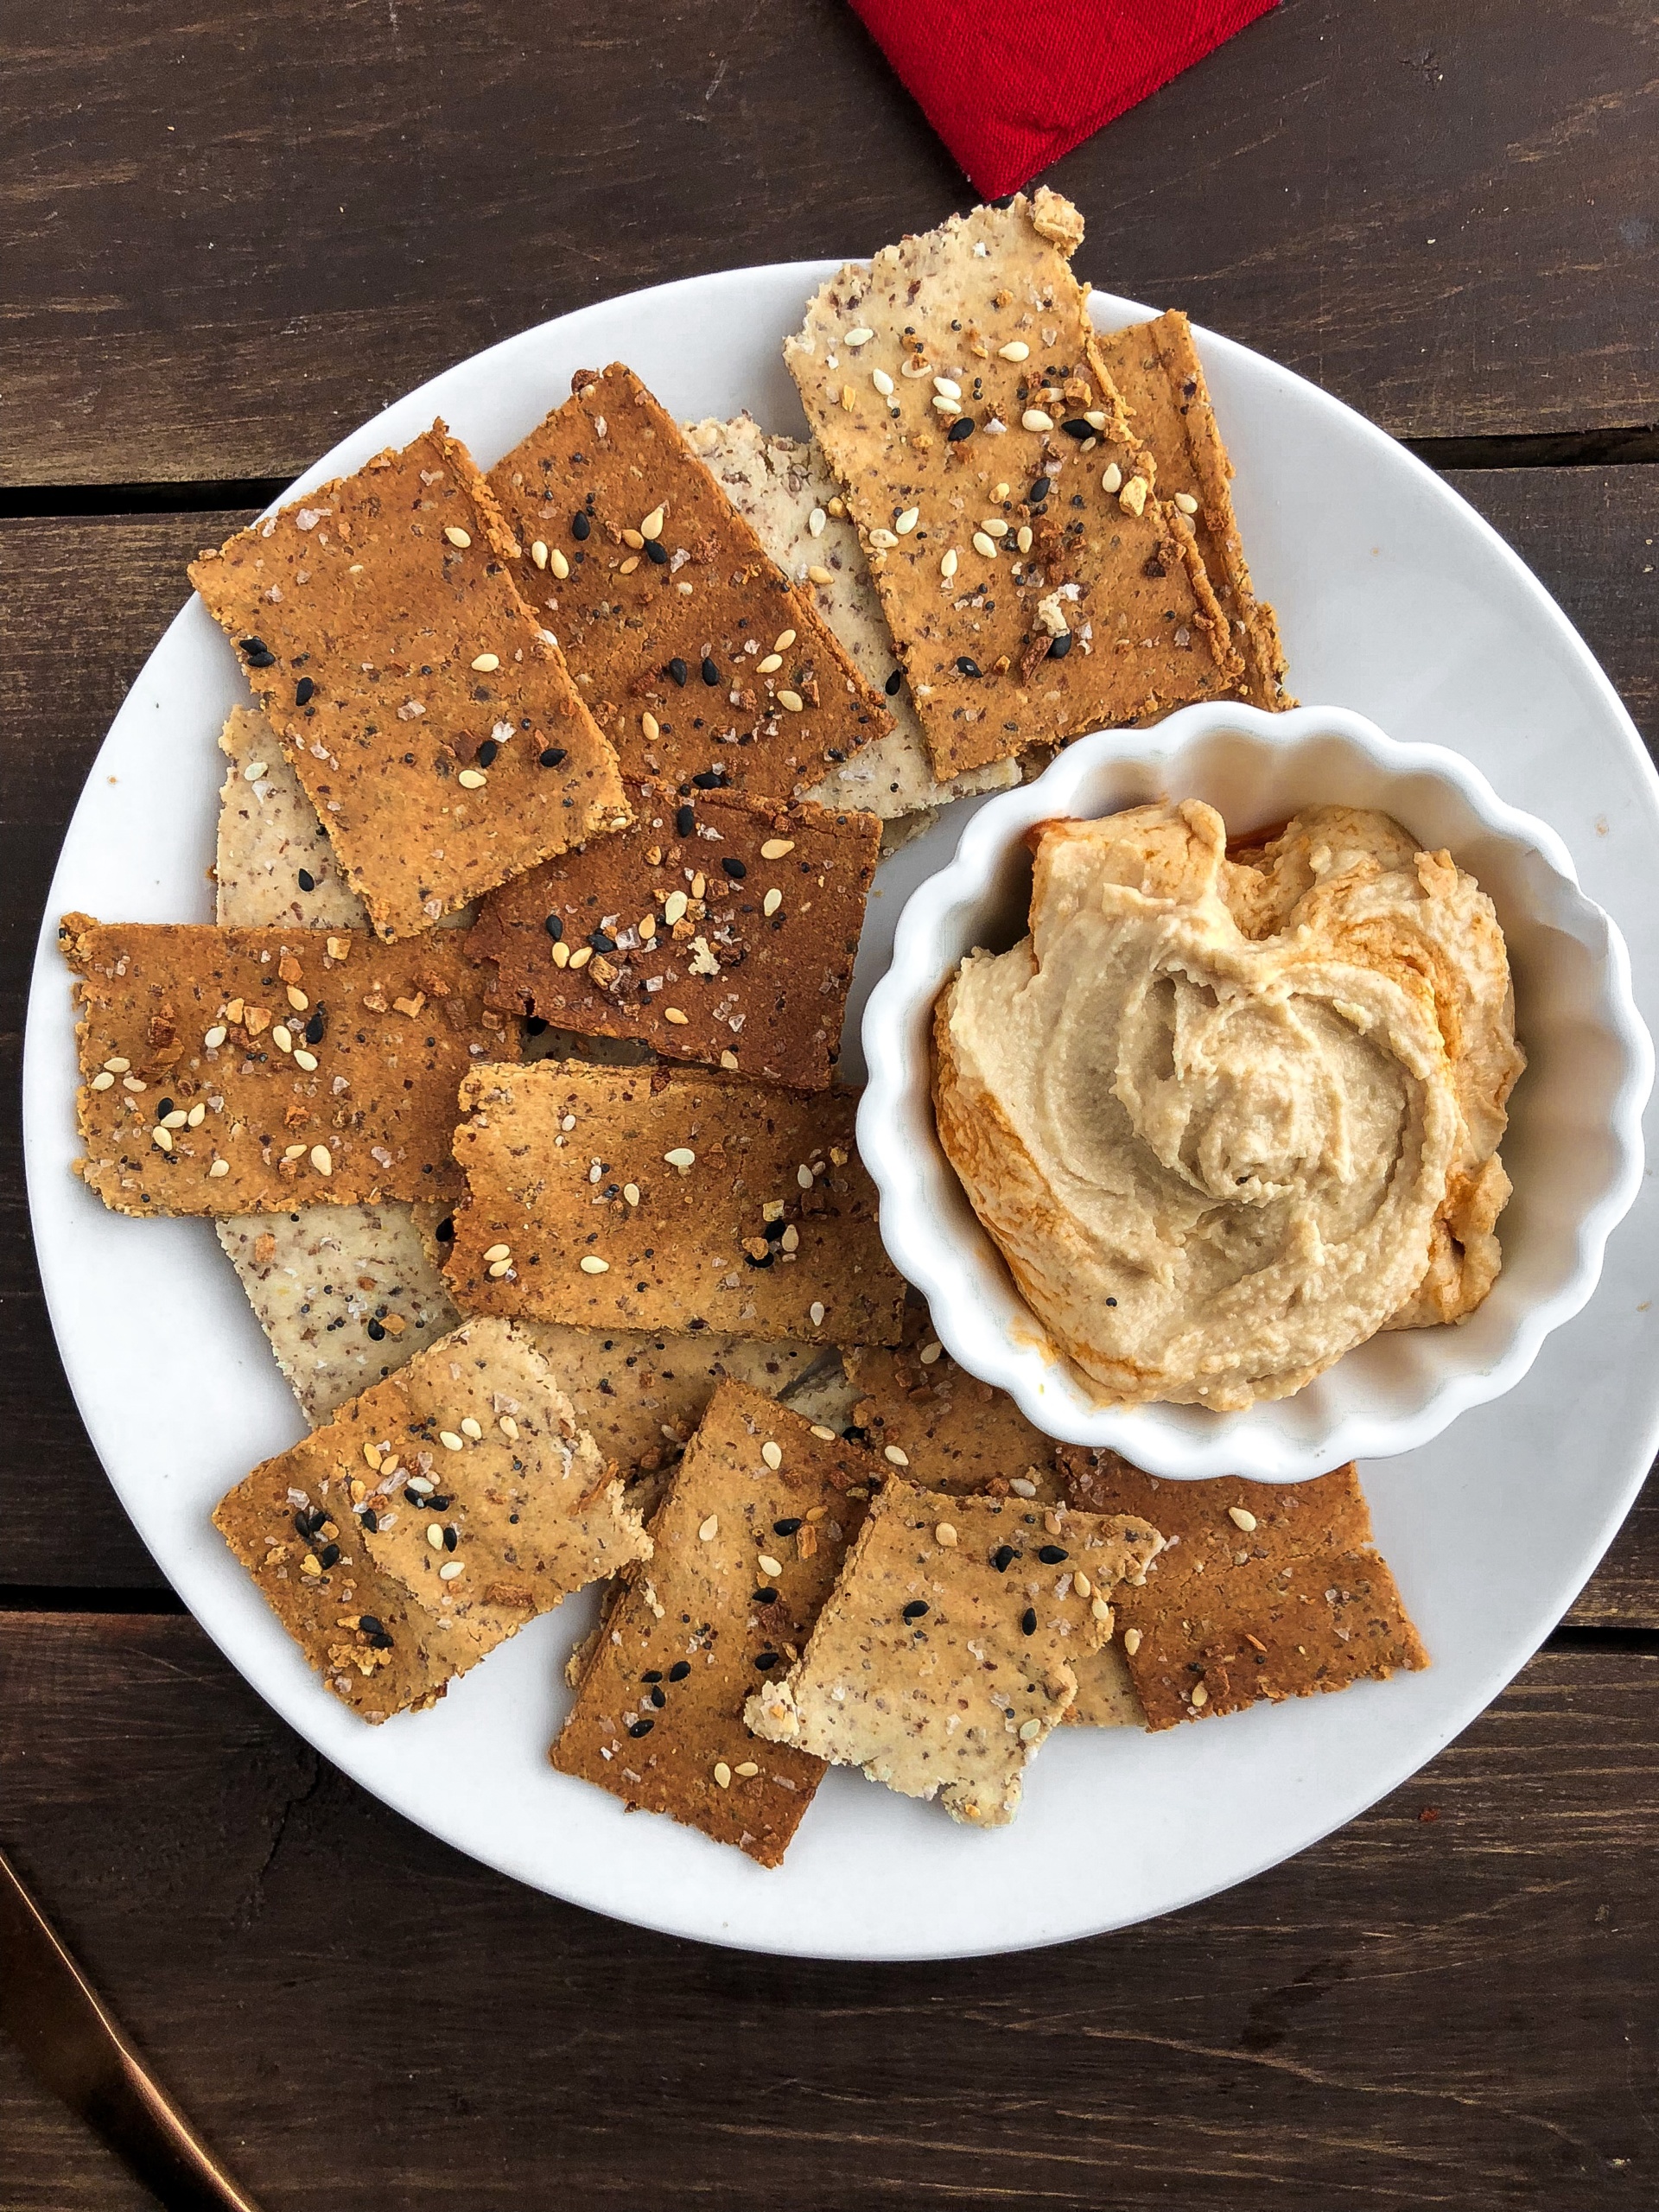 Paleo crackers with trader joe's everything but the bagel seasoning on top.